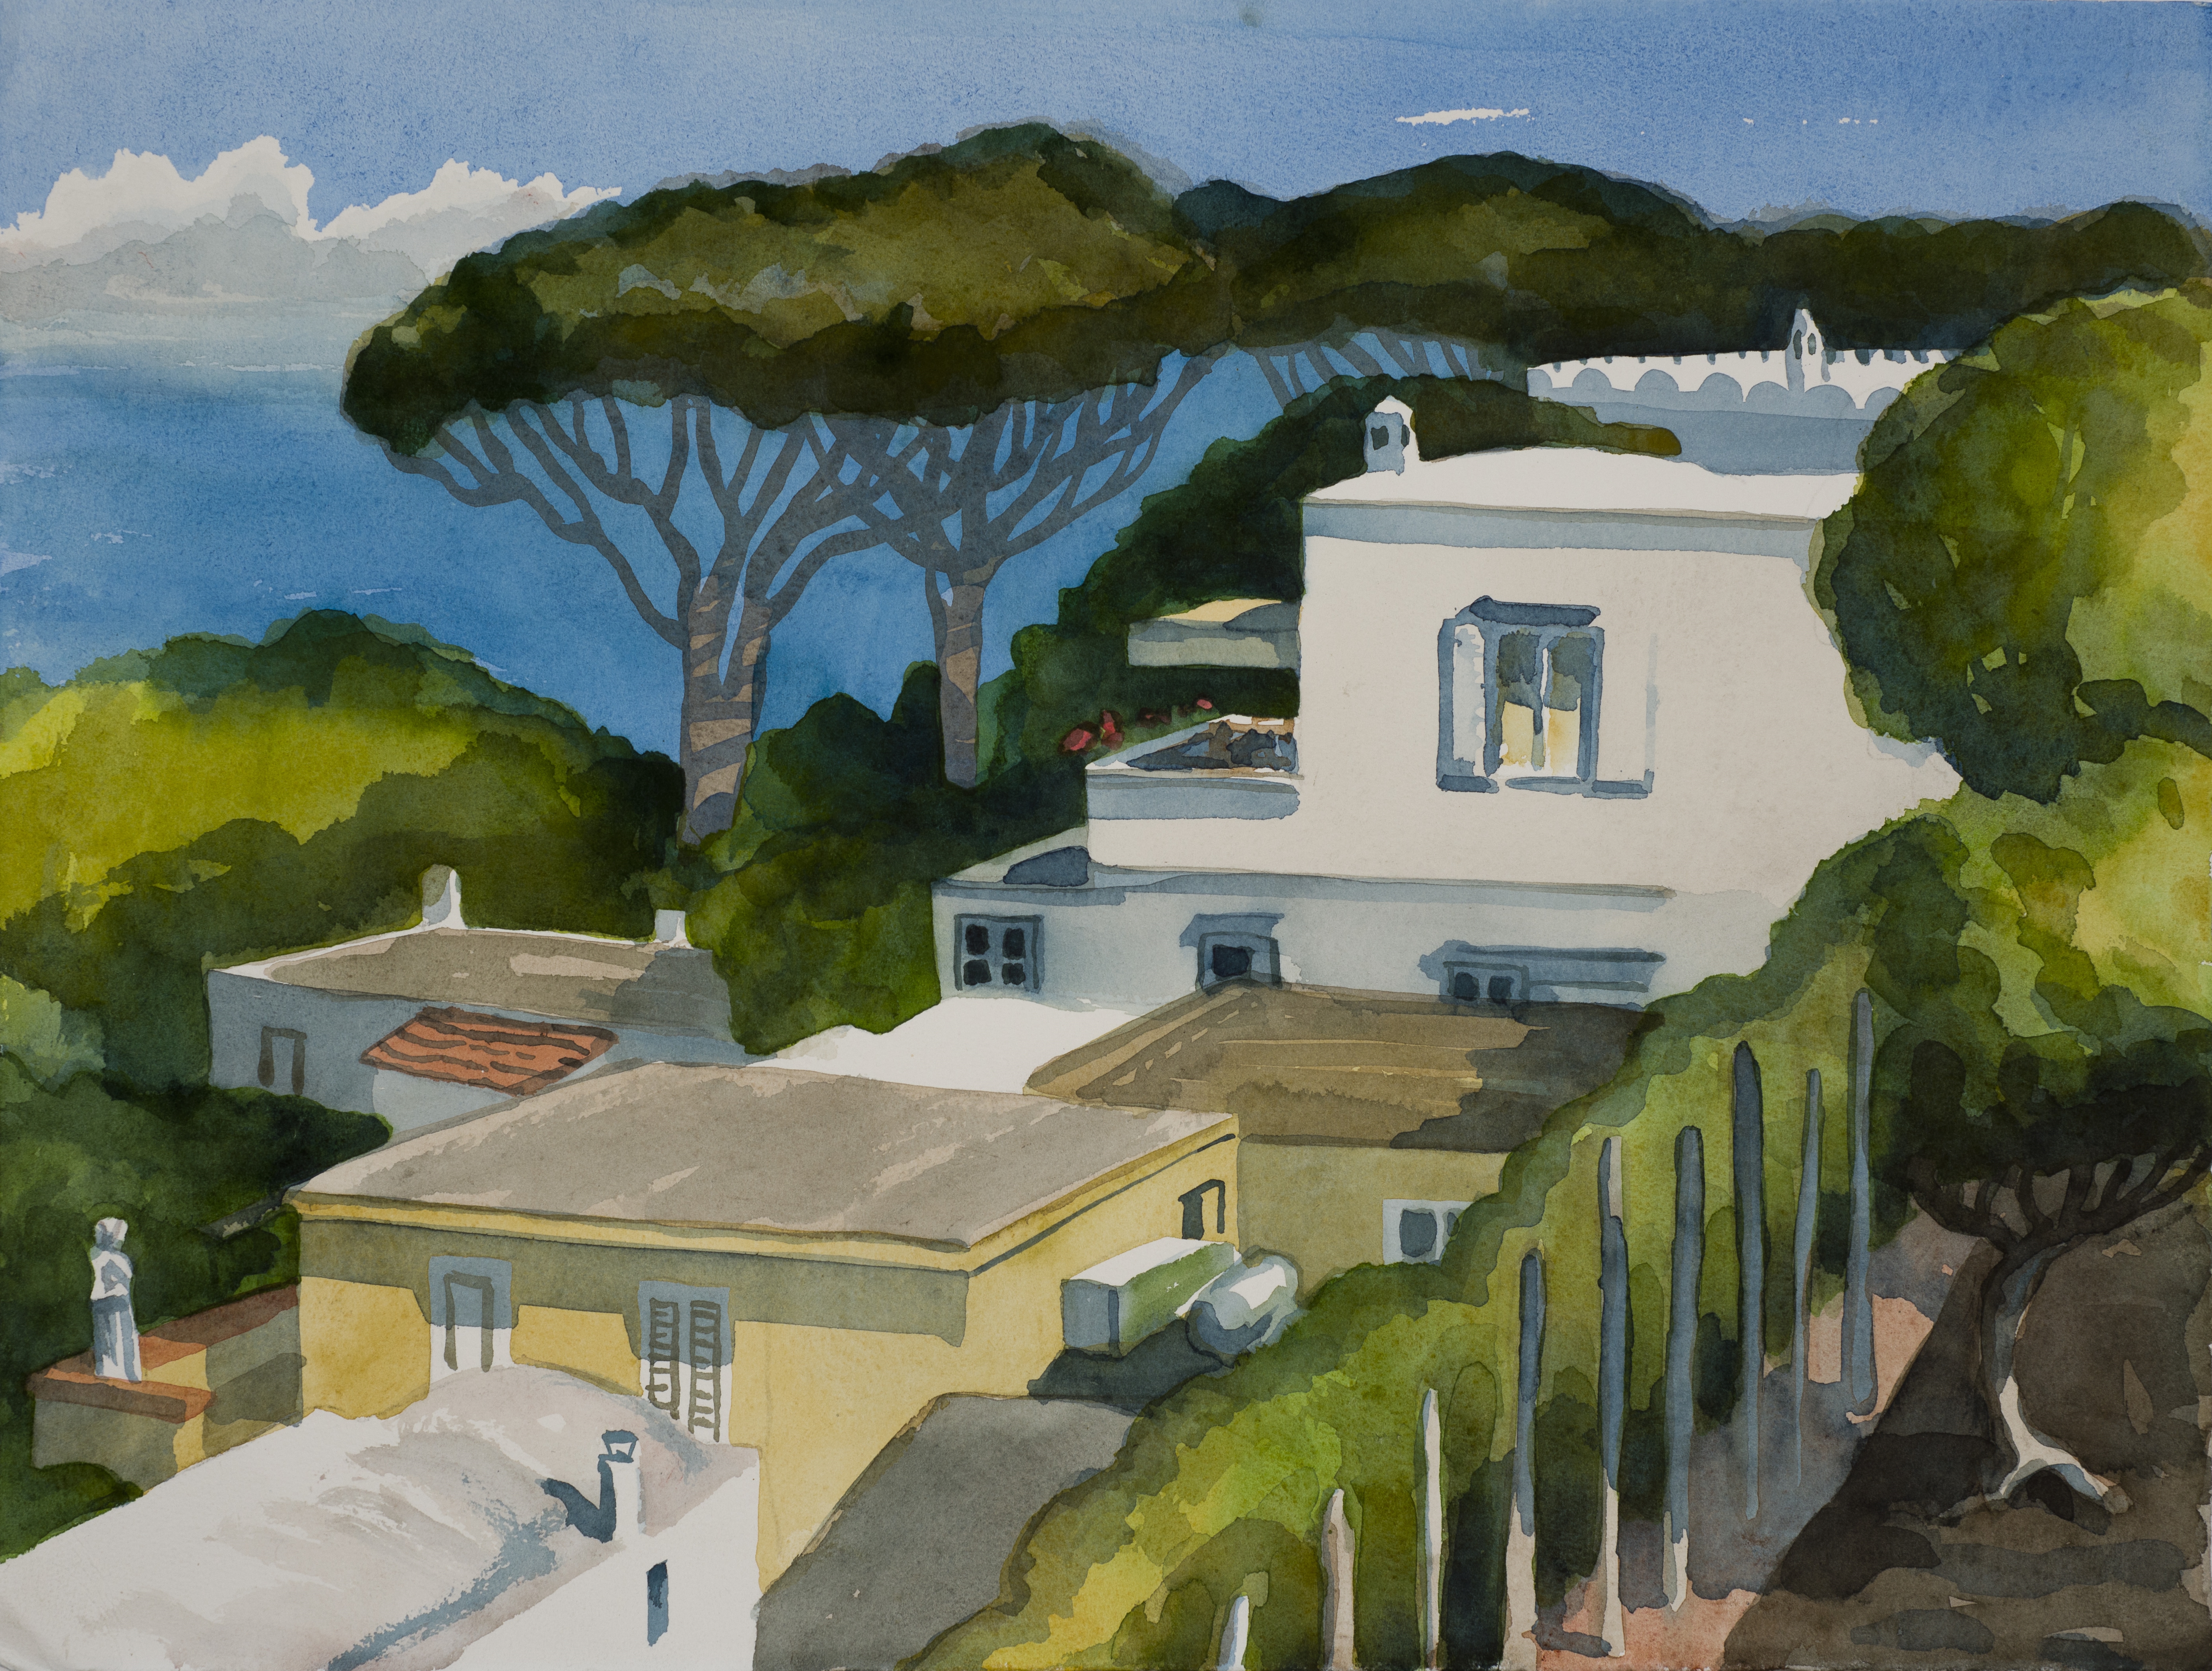 Capri Revisited. Peter Sternäng shows his paintings at Villa San Michele from May 21 to June 3